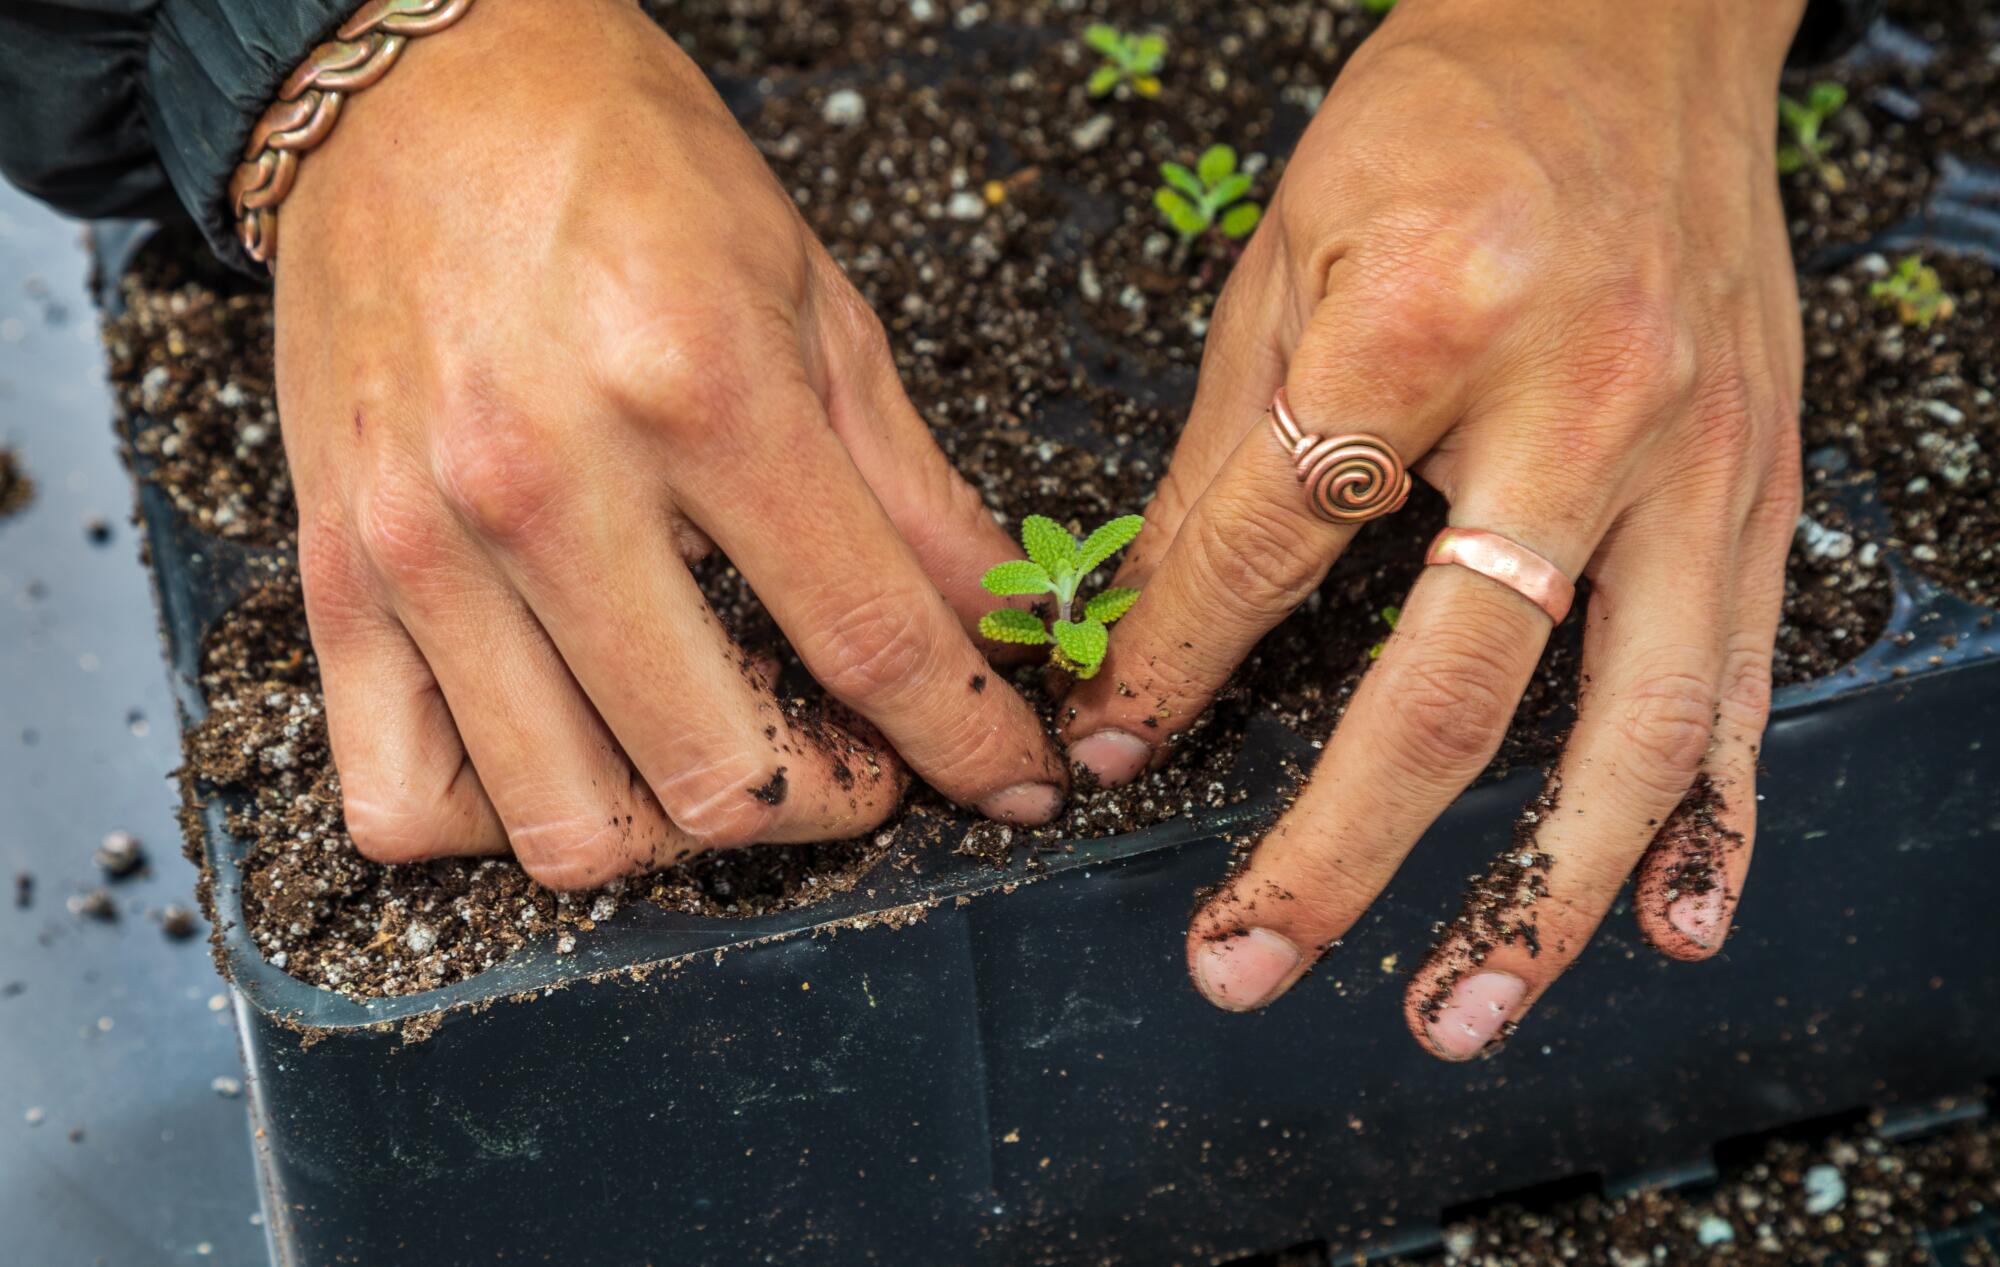 Hands place a seedling in a tray of dirt.